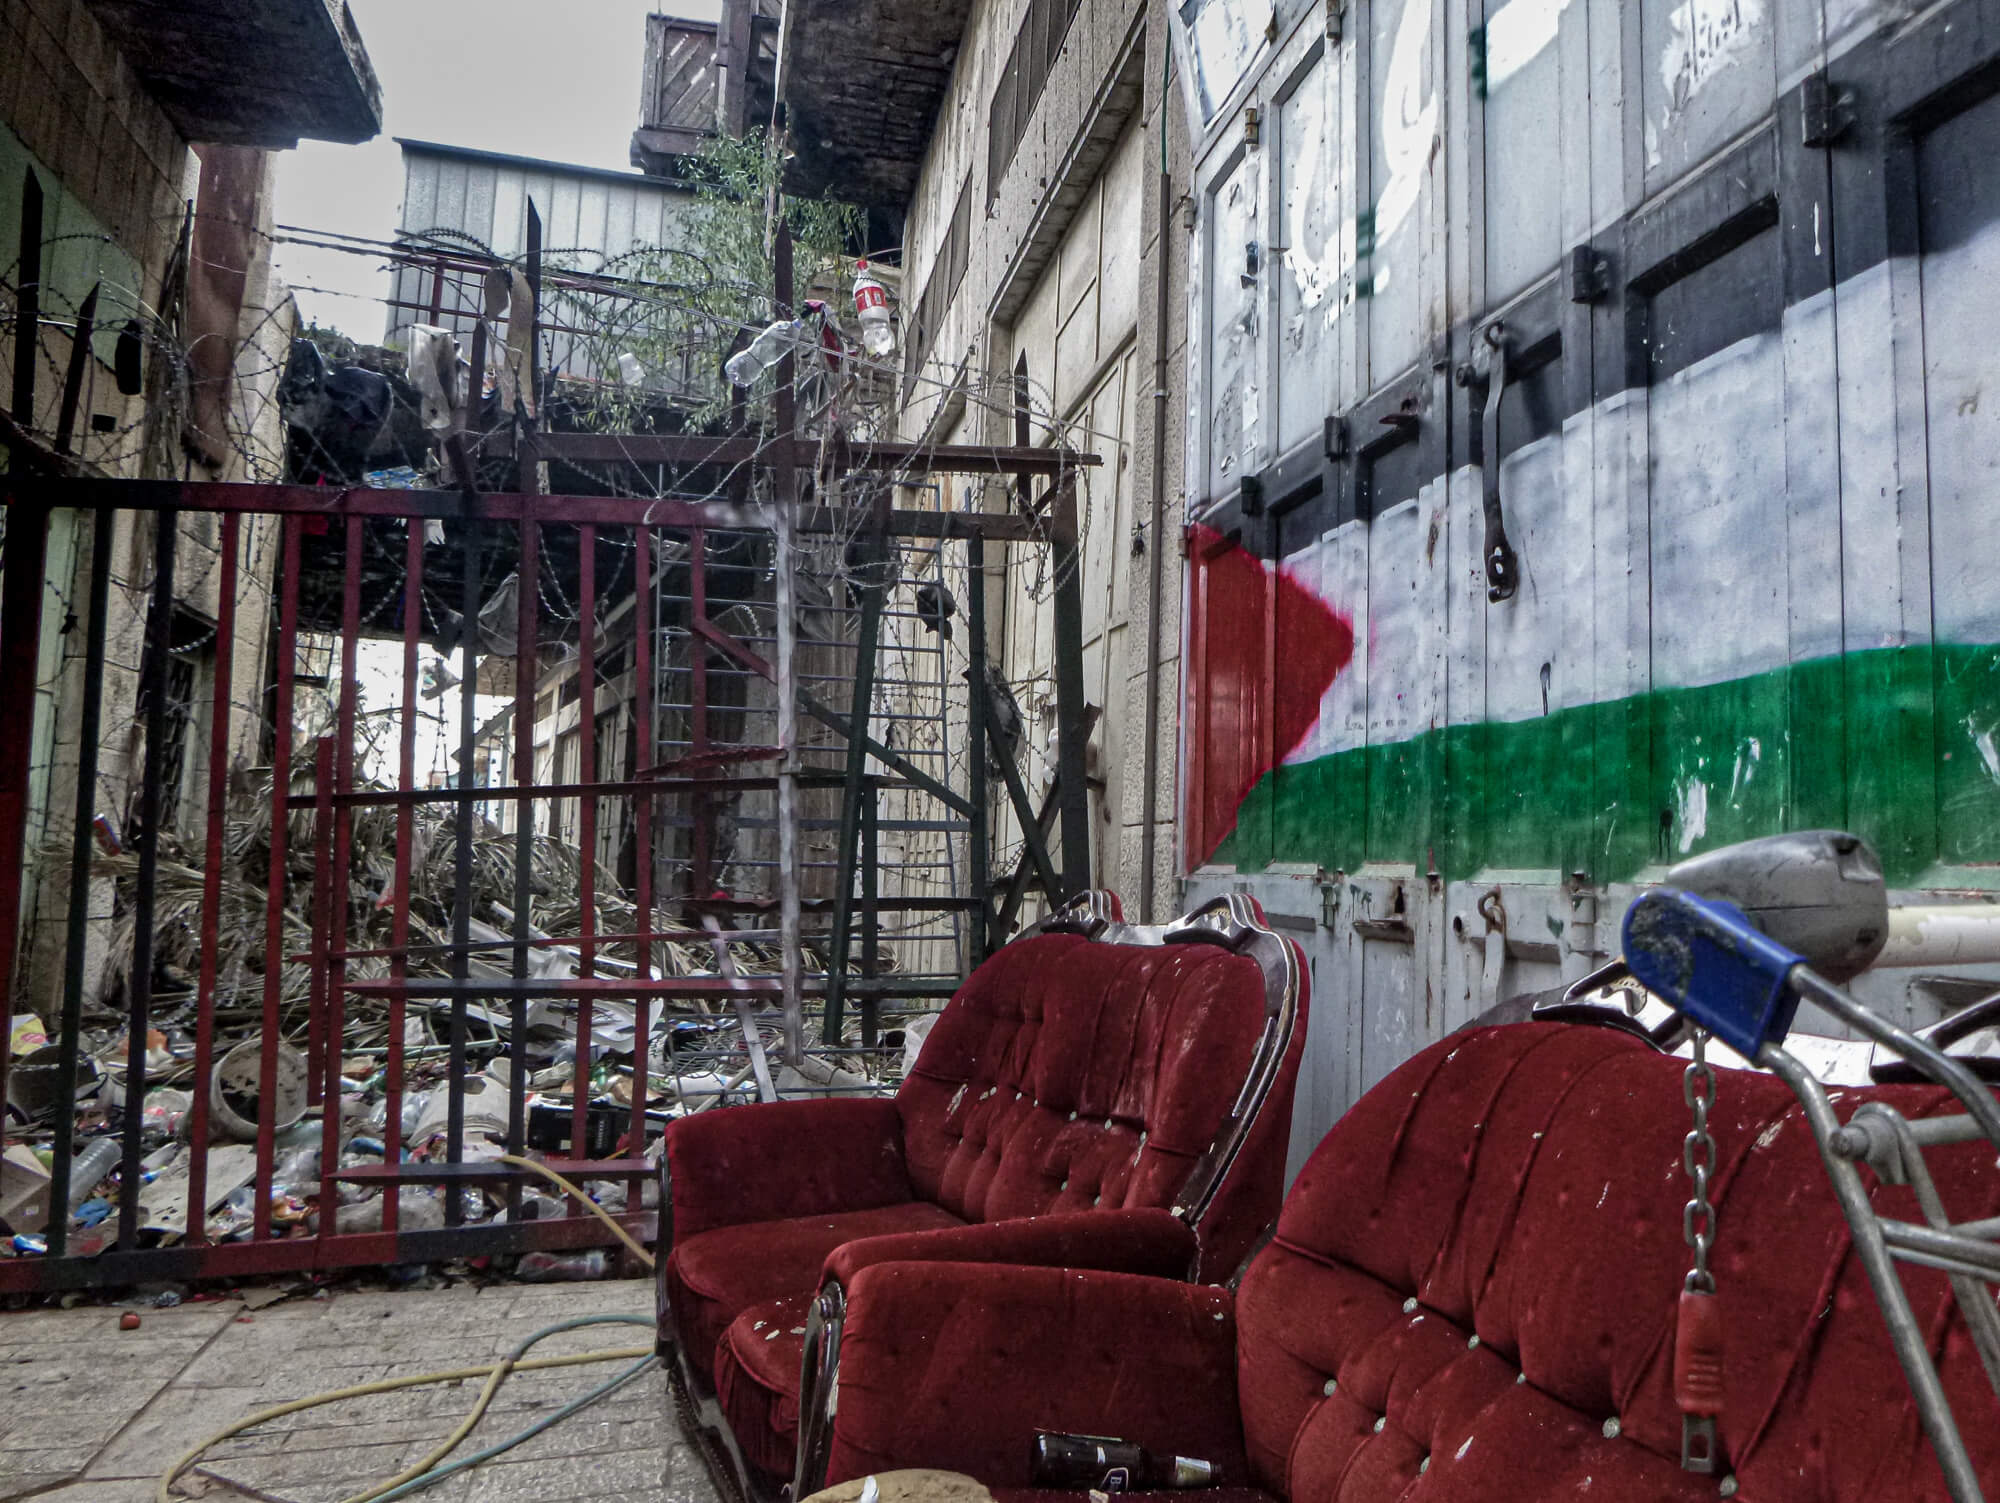 Street of Hebron - most important place to visit in Israel and Palestine